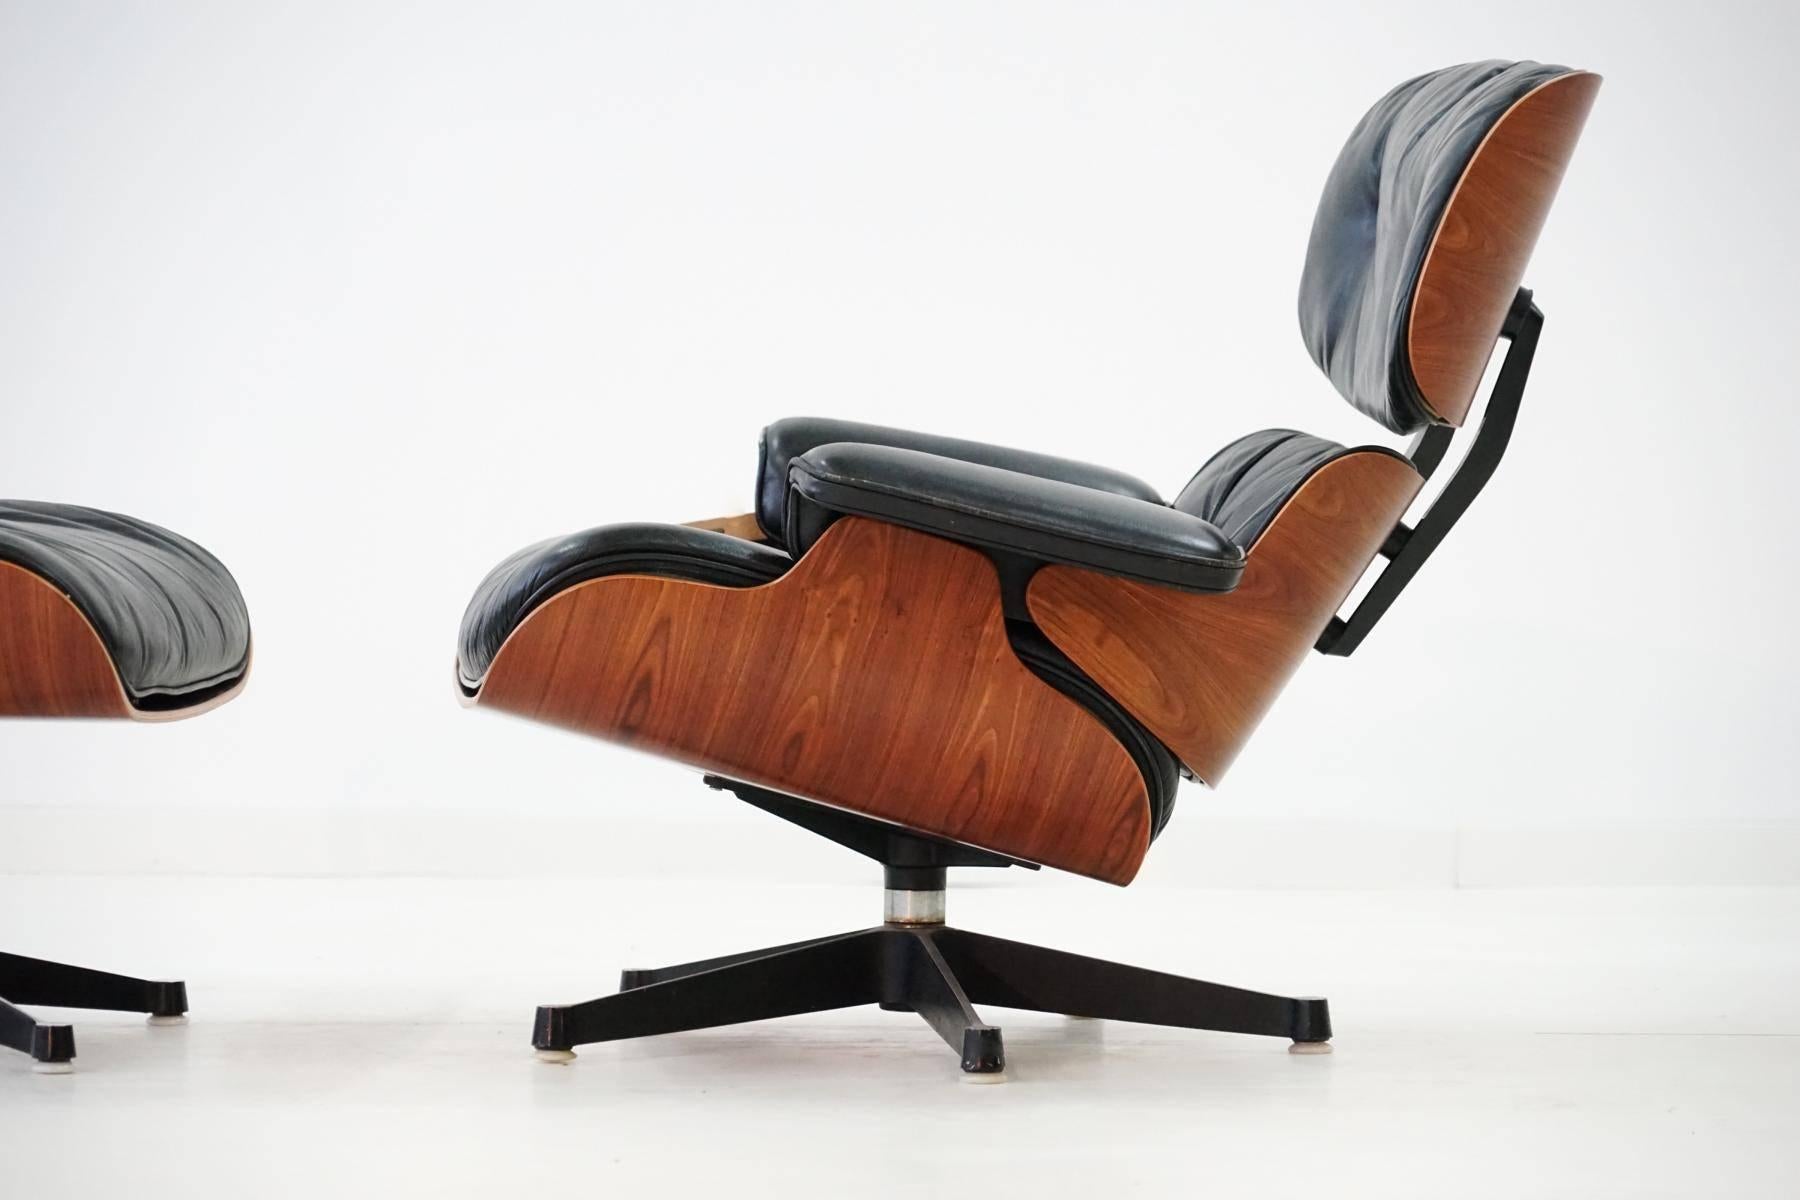 Charles Eames original lounge chair Herman Miller leather Santos rosewood armchair
This Eames lounge chair plus ottoman has been produced in the manufacture of Herman Miller. The chair is very comfortable thanks to the feather filling. The unique